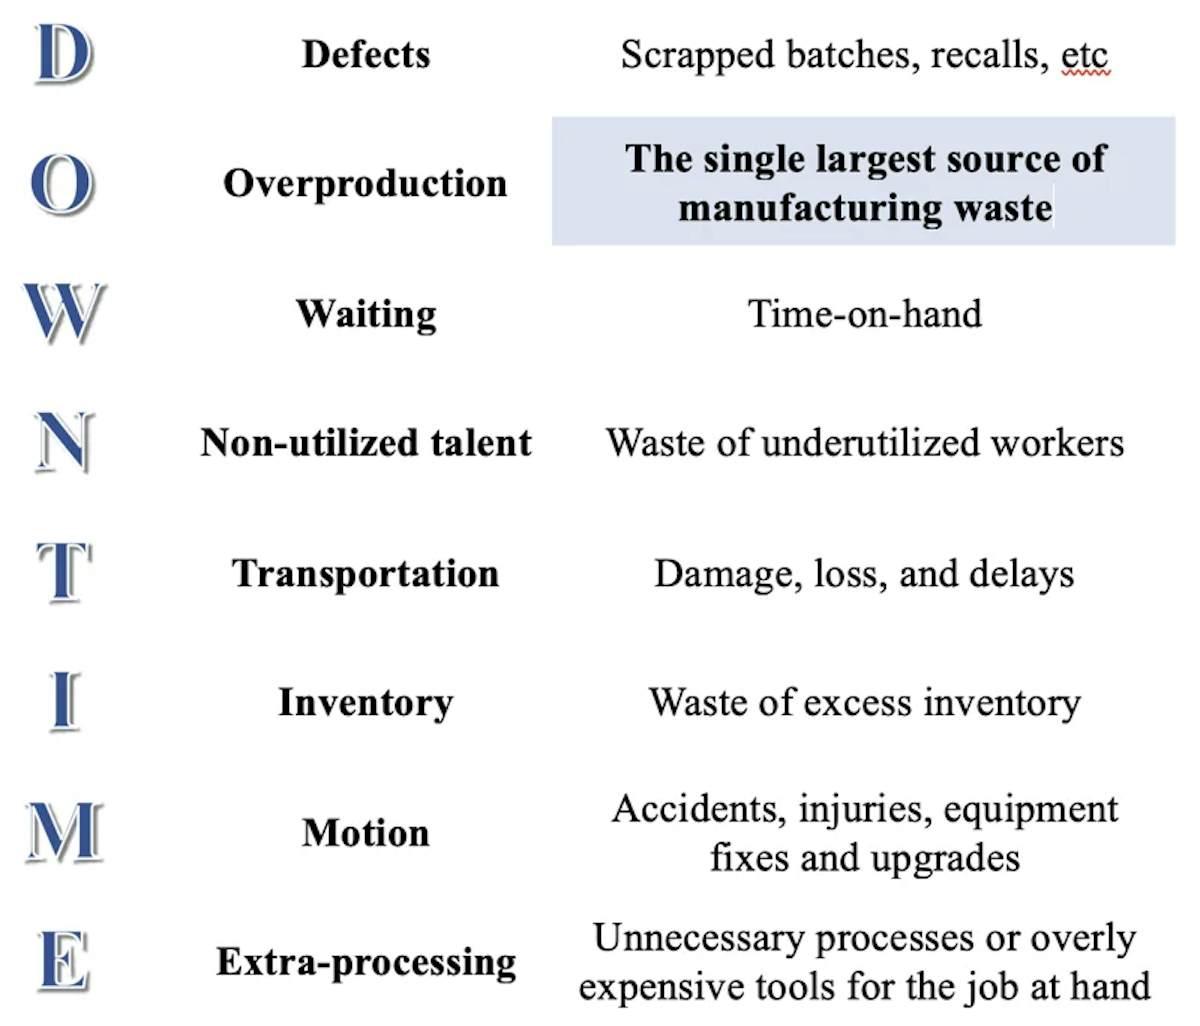 8 critical areas of waste